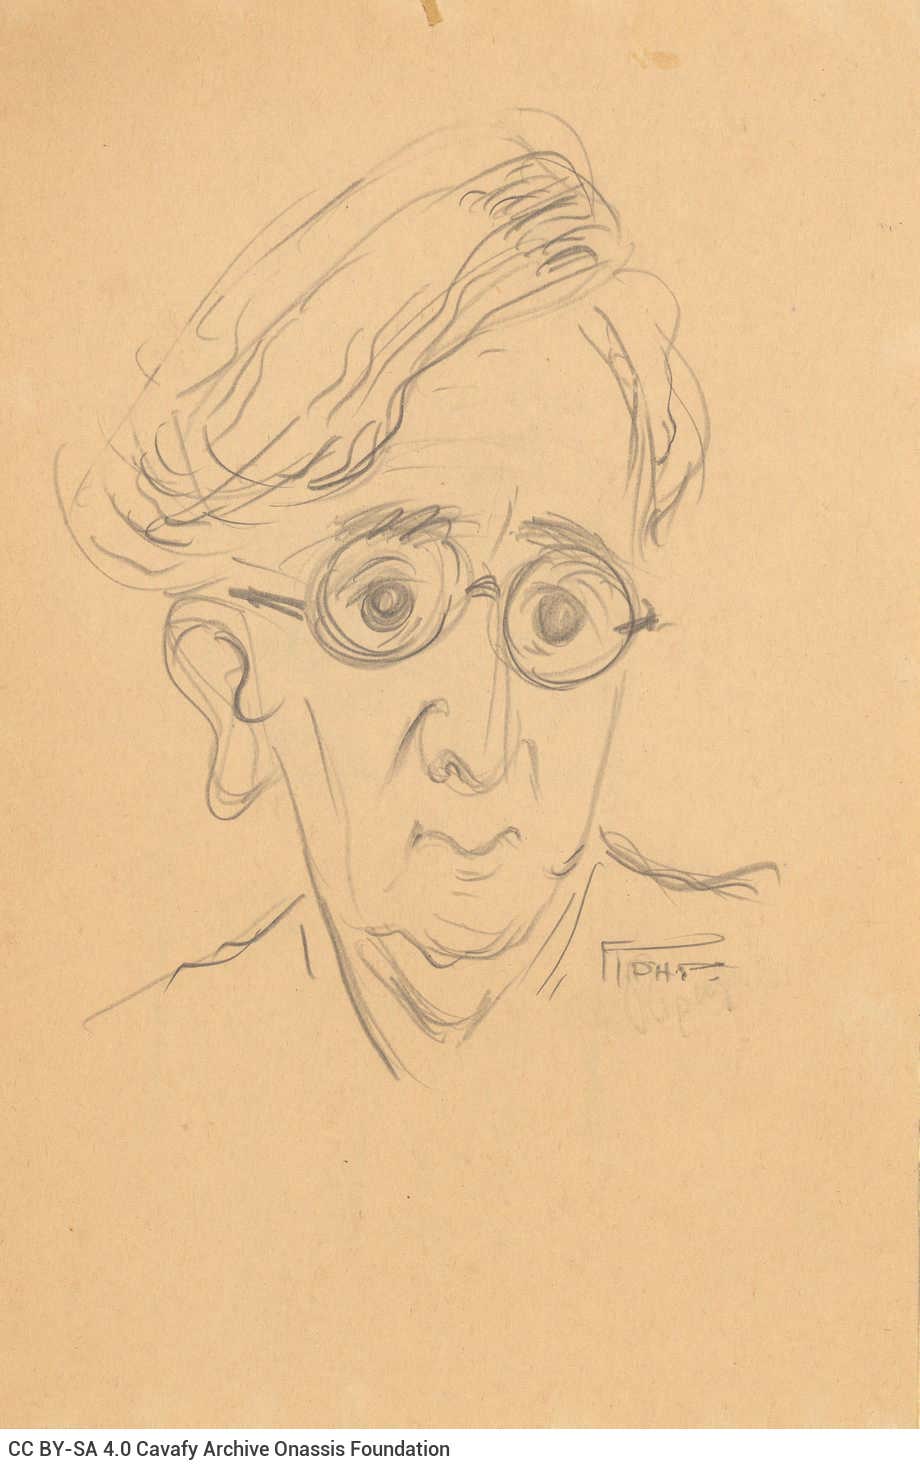 Sketch in pencil made by Gerasimos Grigoris. It depicts Cavafy's face. Another sketch on the verso of the sheet, also in penc